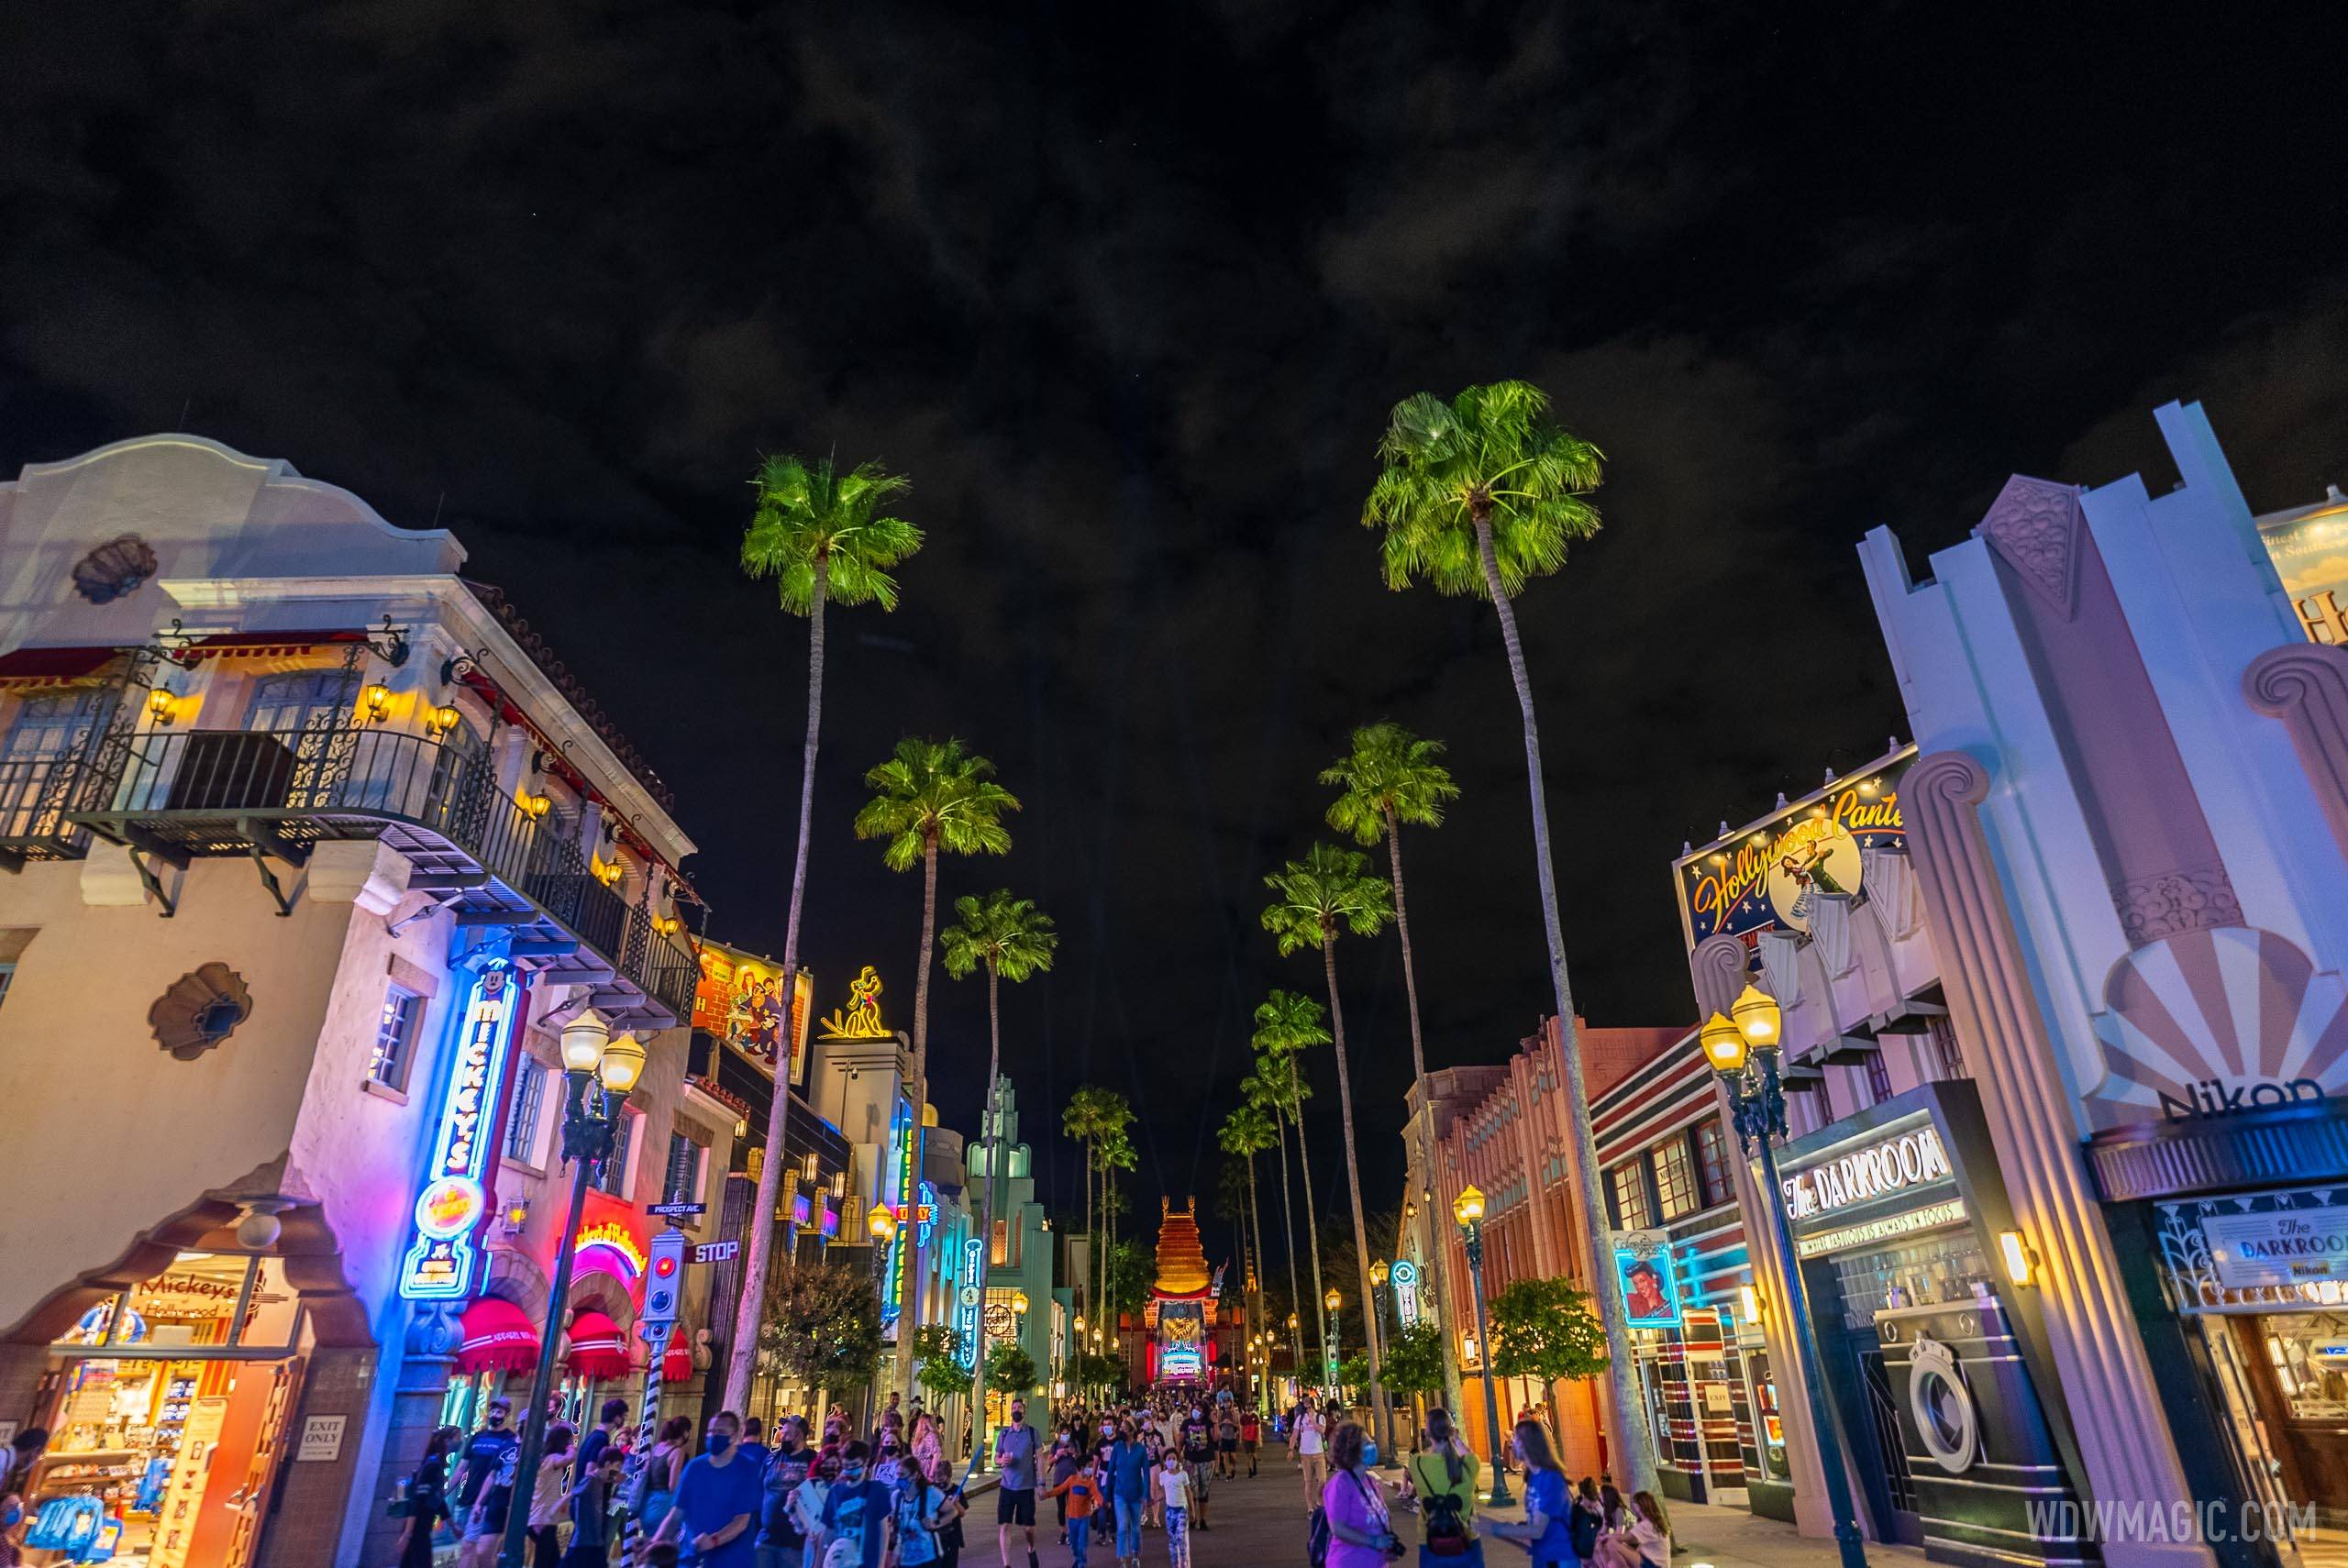 Disney's Hollywood Studios has provisional hours of 9am to 7pm in July